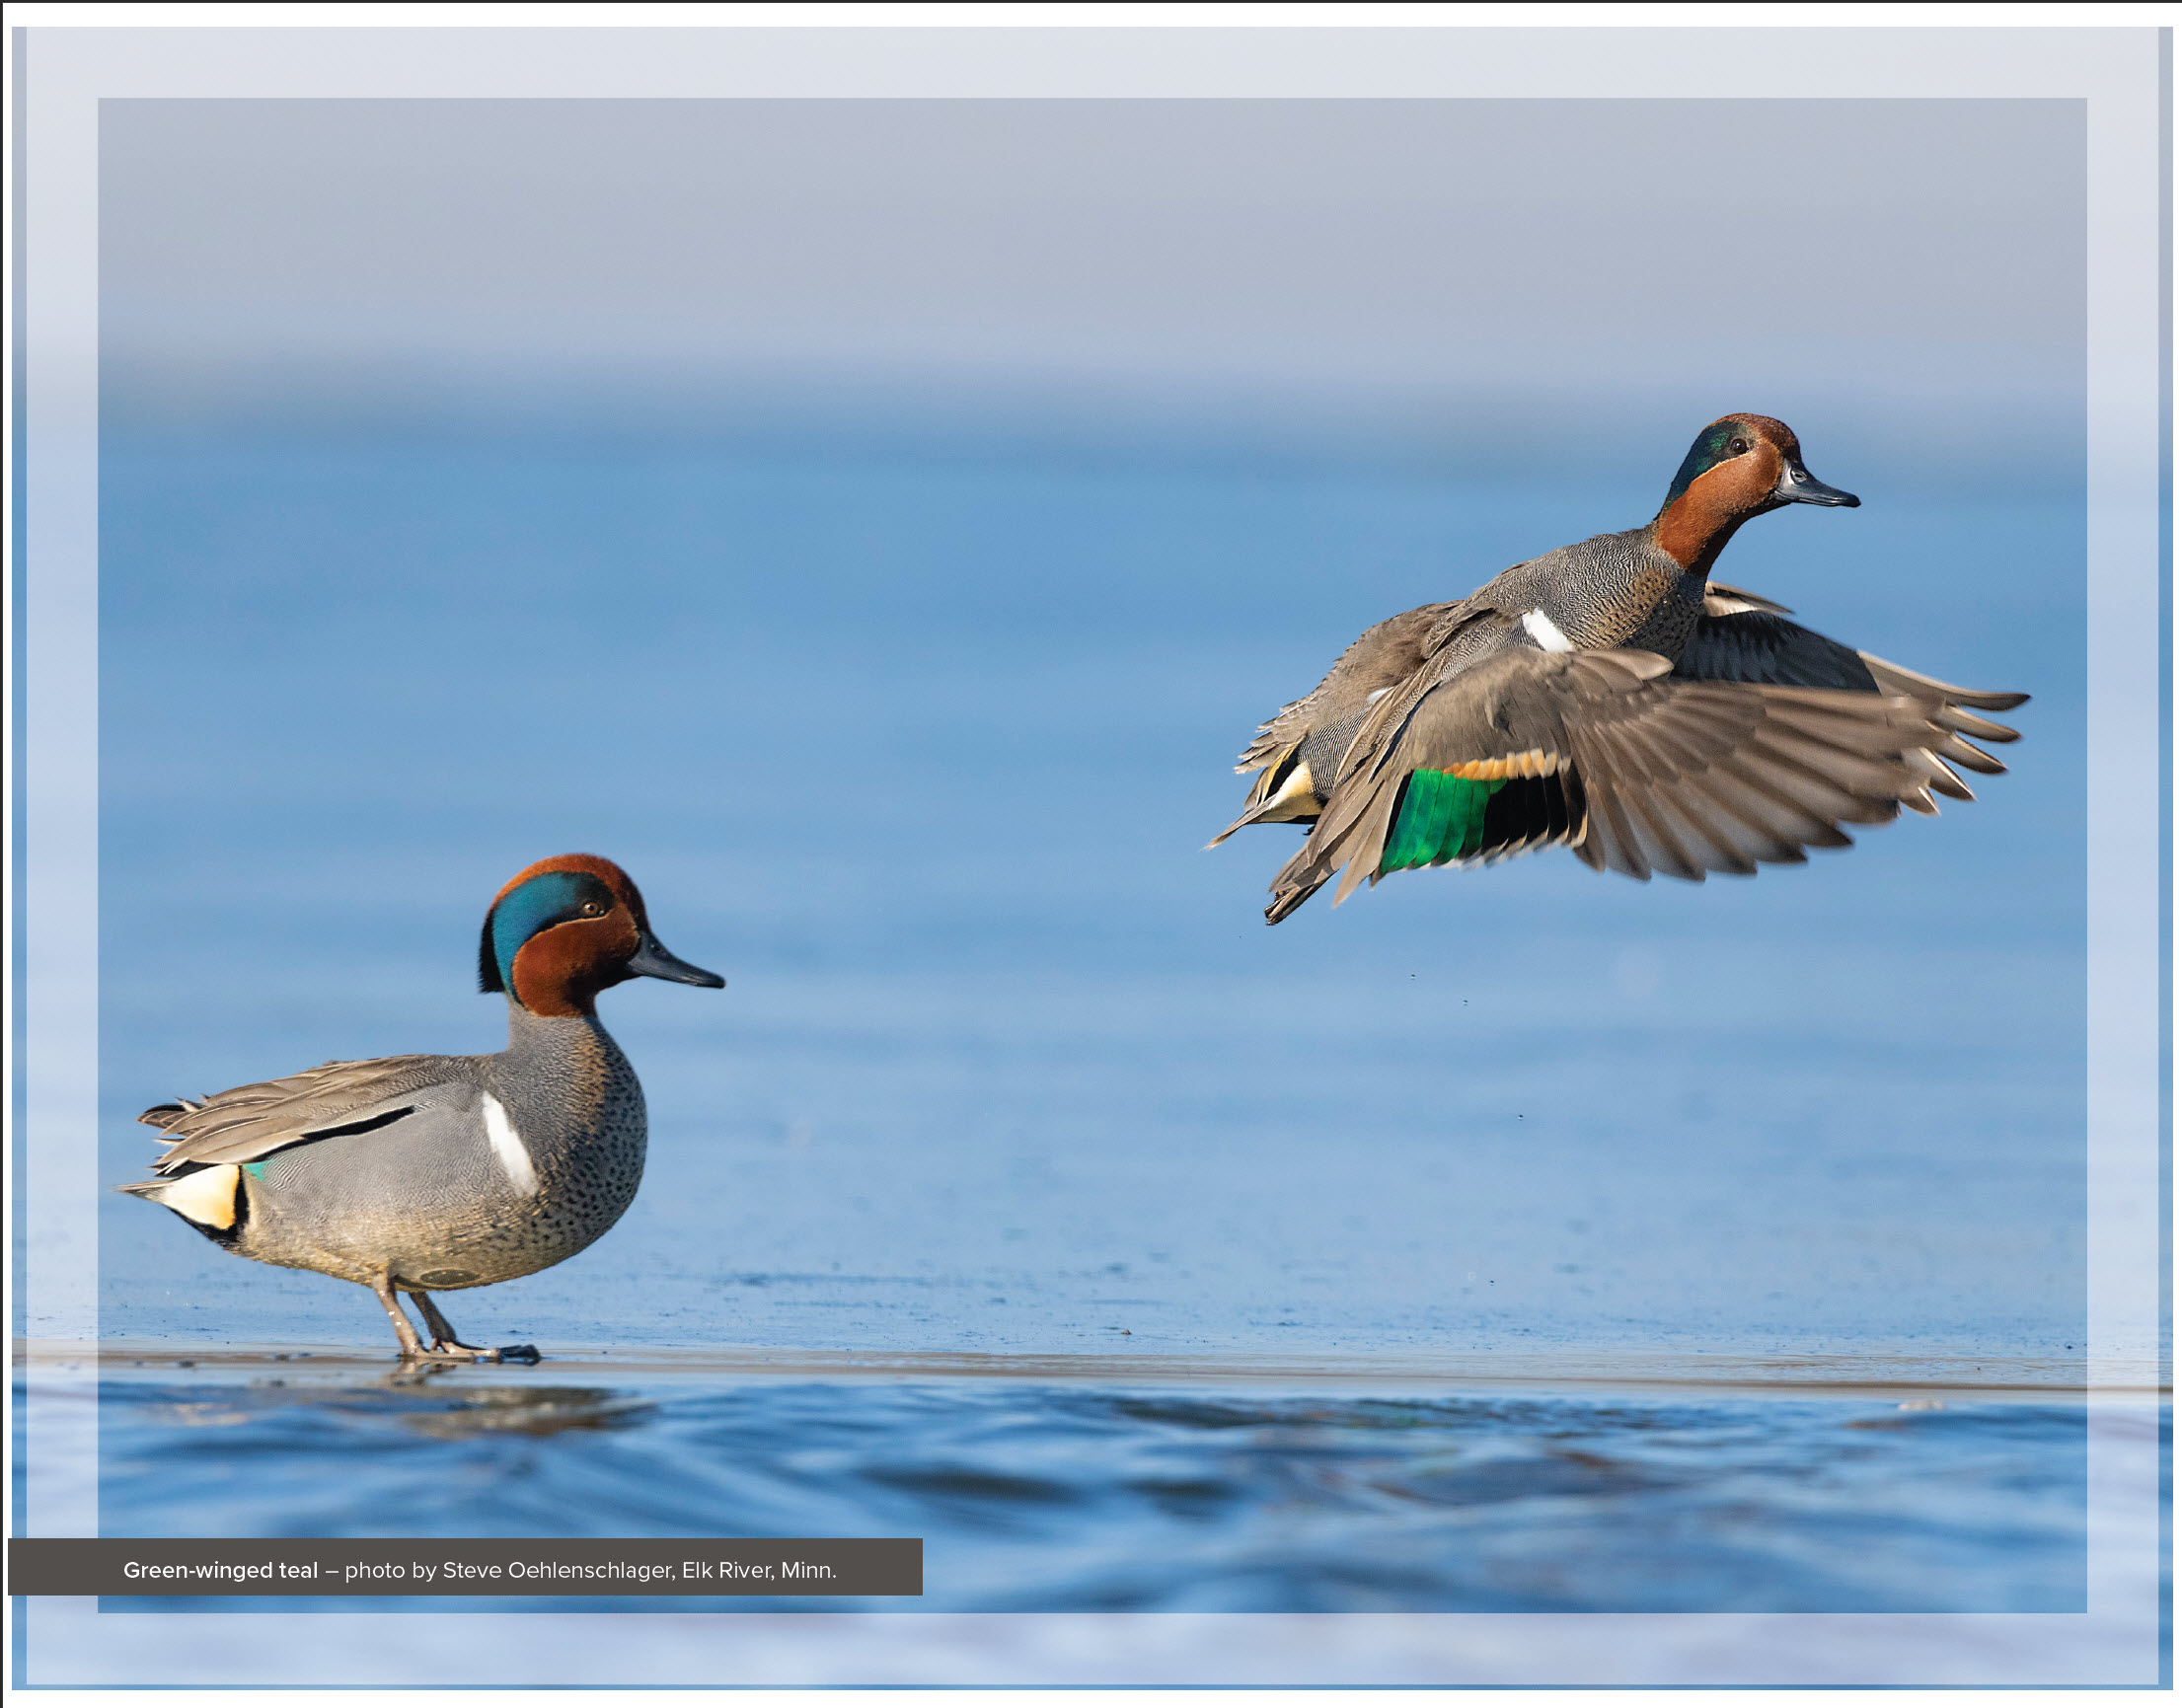 Green-winged teal taken by Steve Oehlenschlager